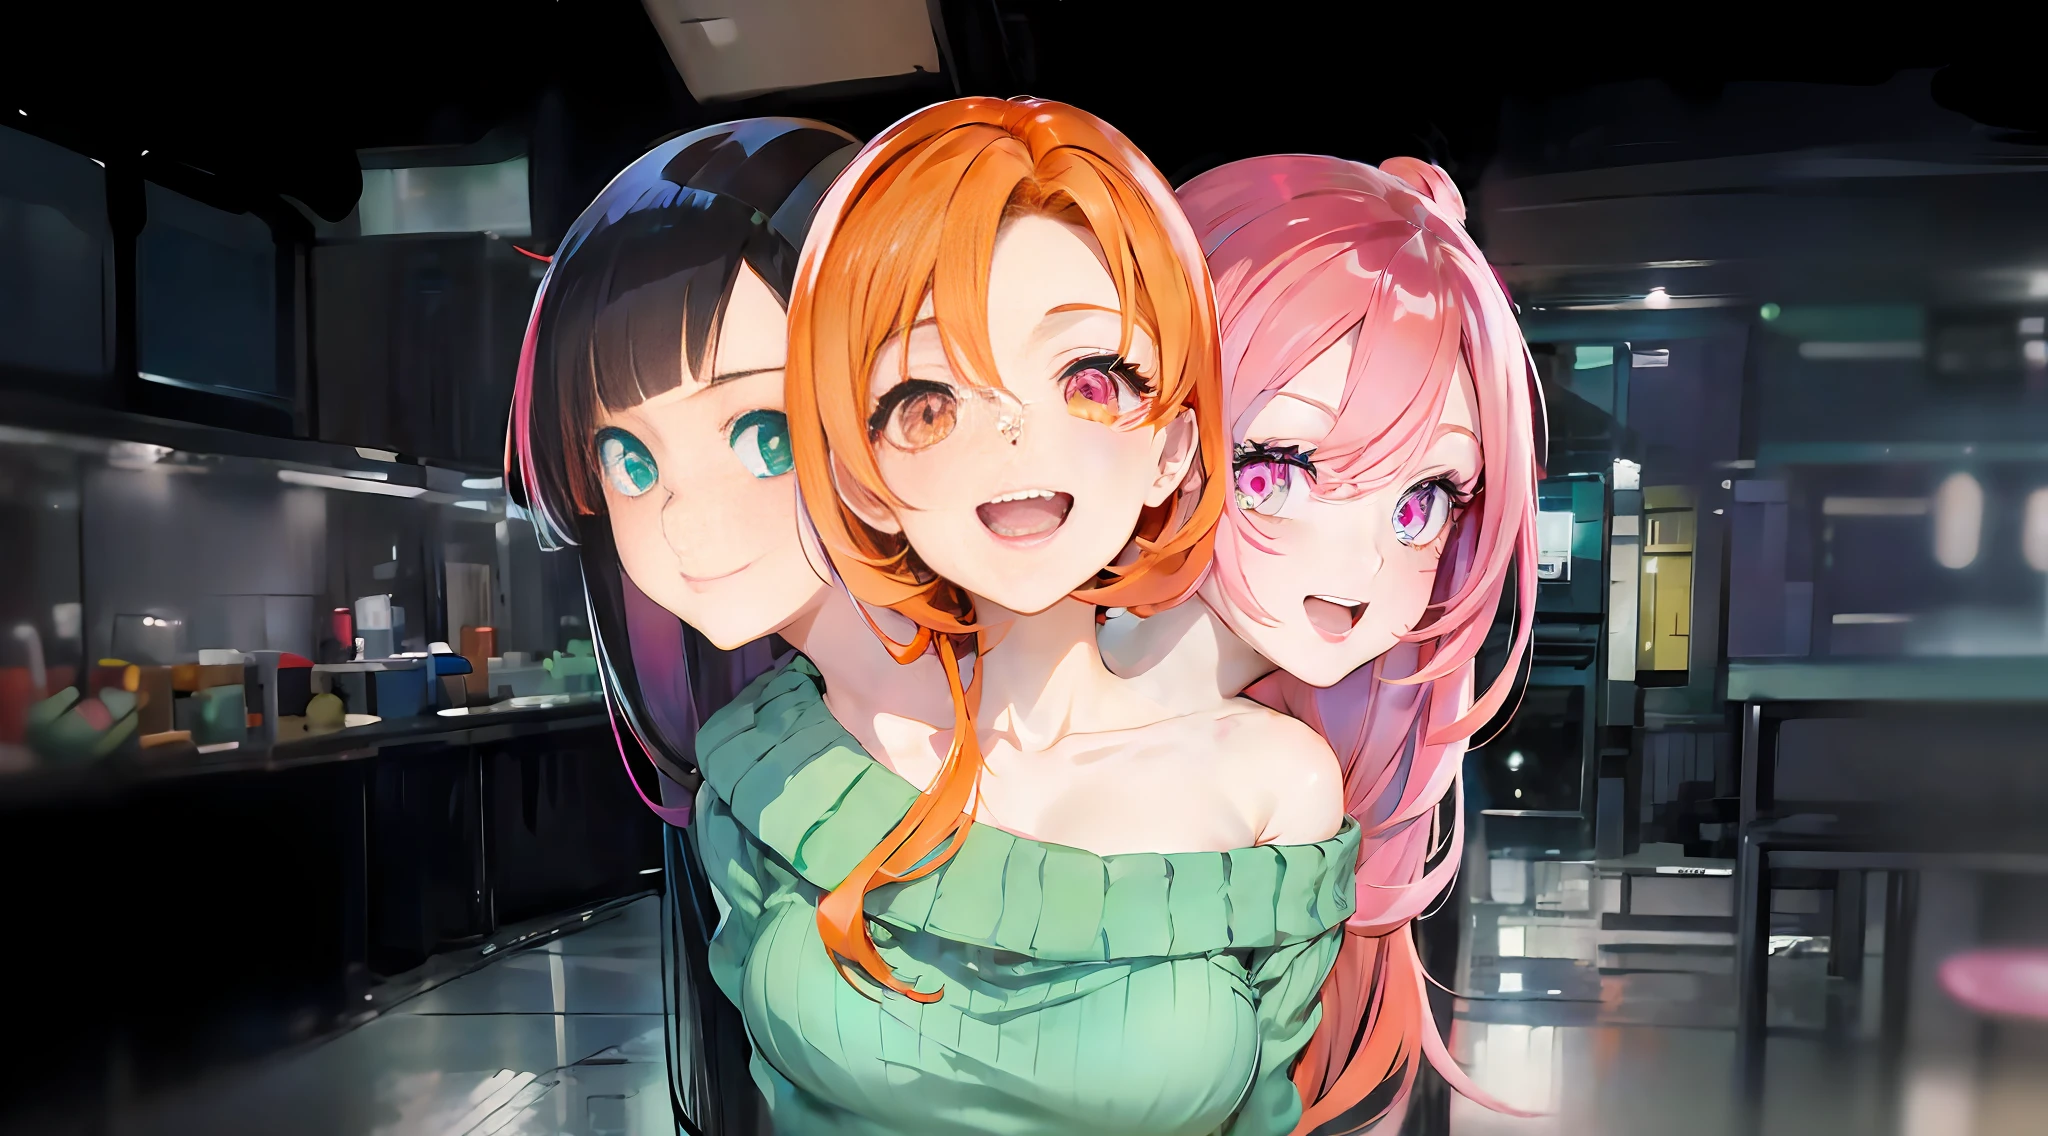 (3heads:1.5), white girl with three heads, diffrent hair colors, black hair,orange hair, pink hair, different eye colors, blue eyes, orange eyes, green eyes, pink eyes,  different expressions, greenopen shoulder sweater,  underground facility